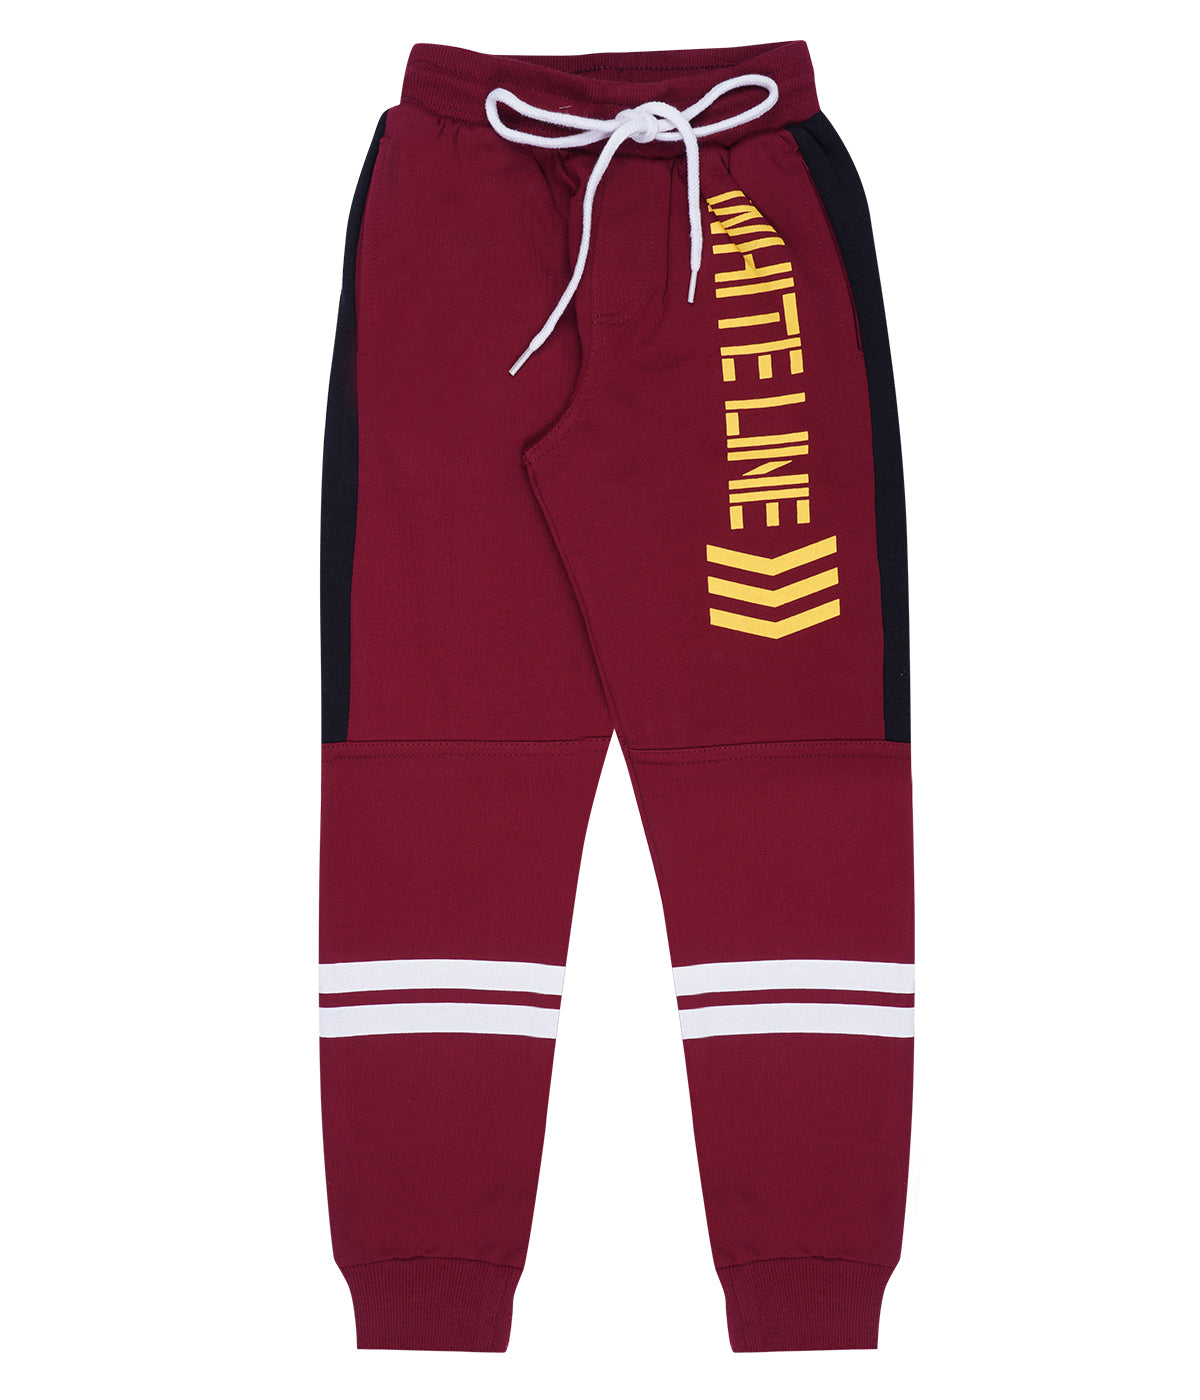 Yalzz Track Pant For Boys Maroon Pack of 1